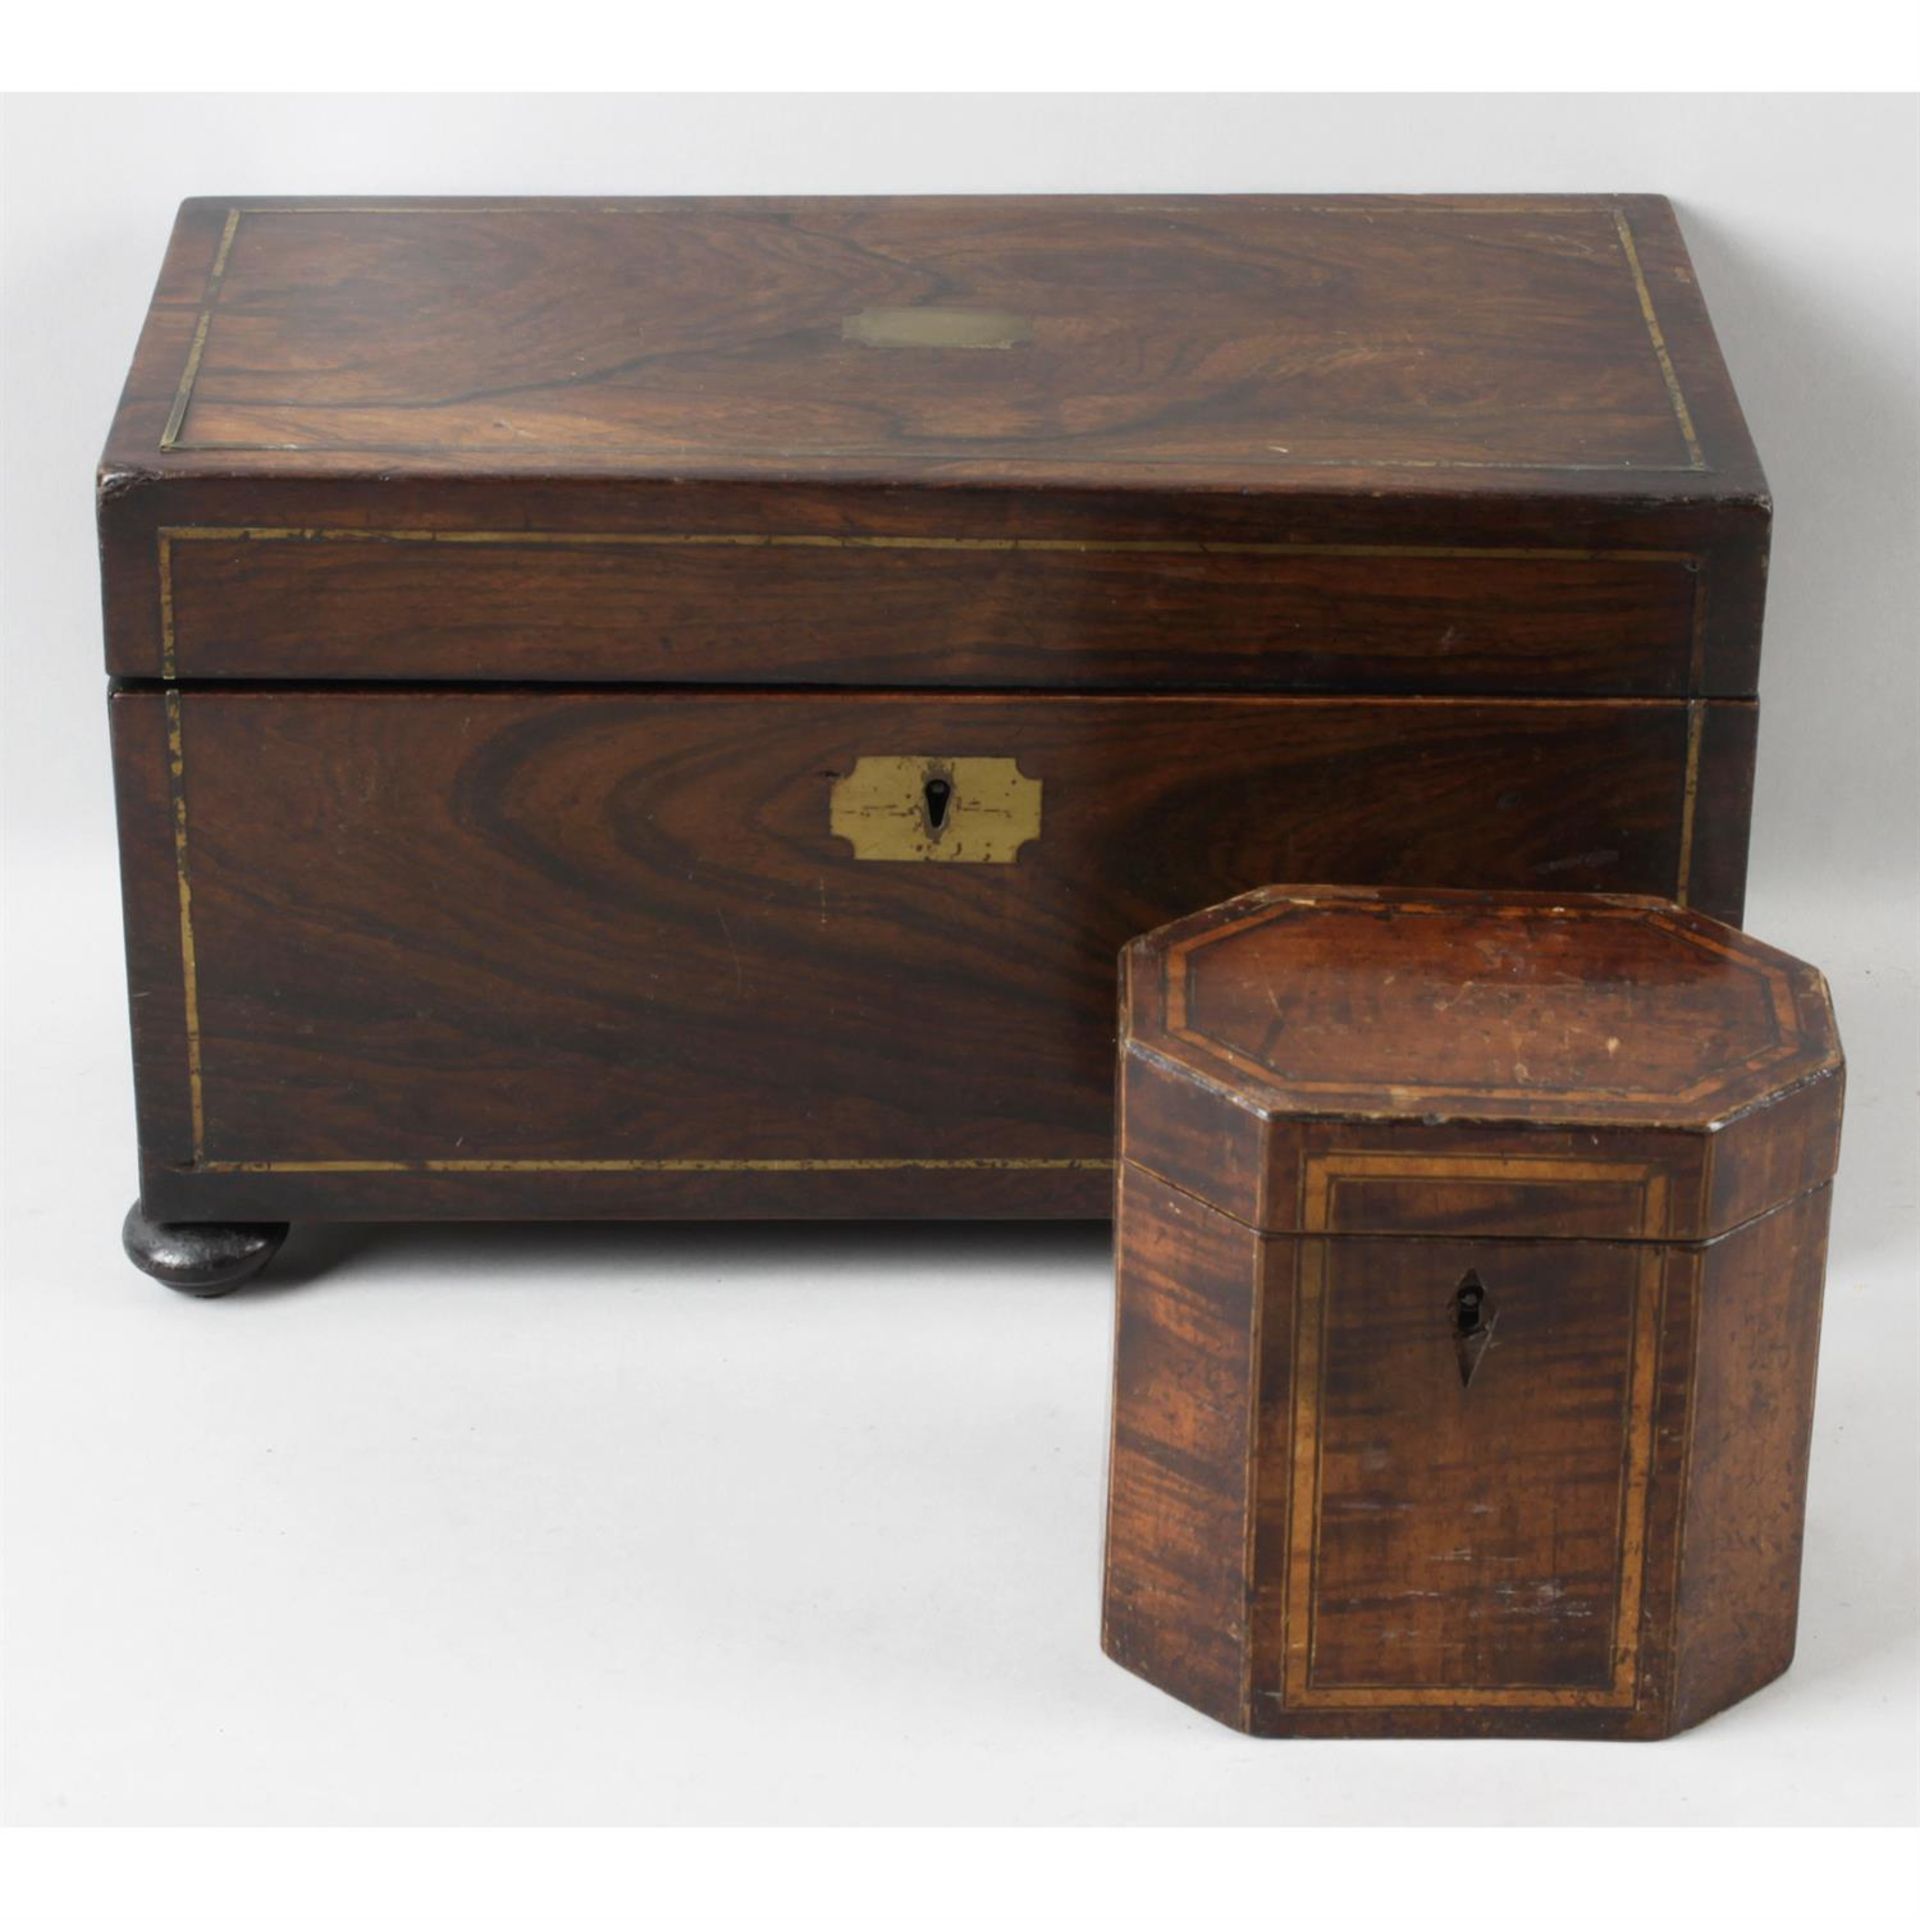 A 19th century rosewood tea caddy, together with a small, octagonal tea caddy. (2)